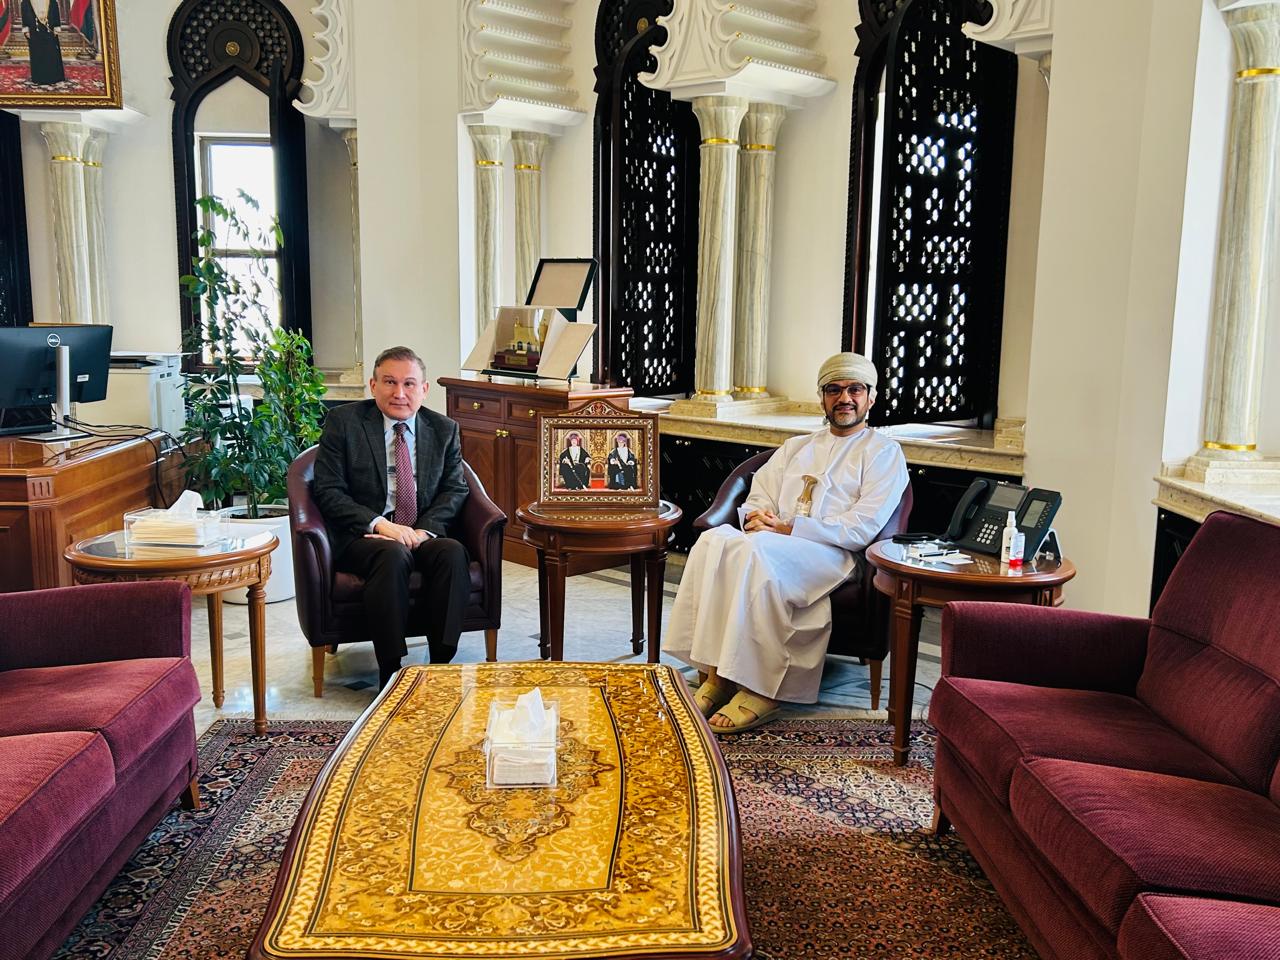 Meeting was held with the Mayor of Muscat